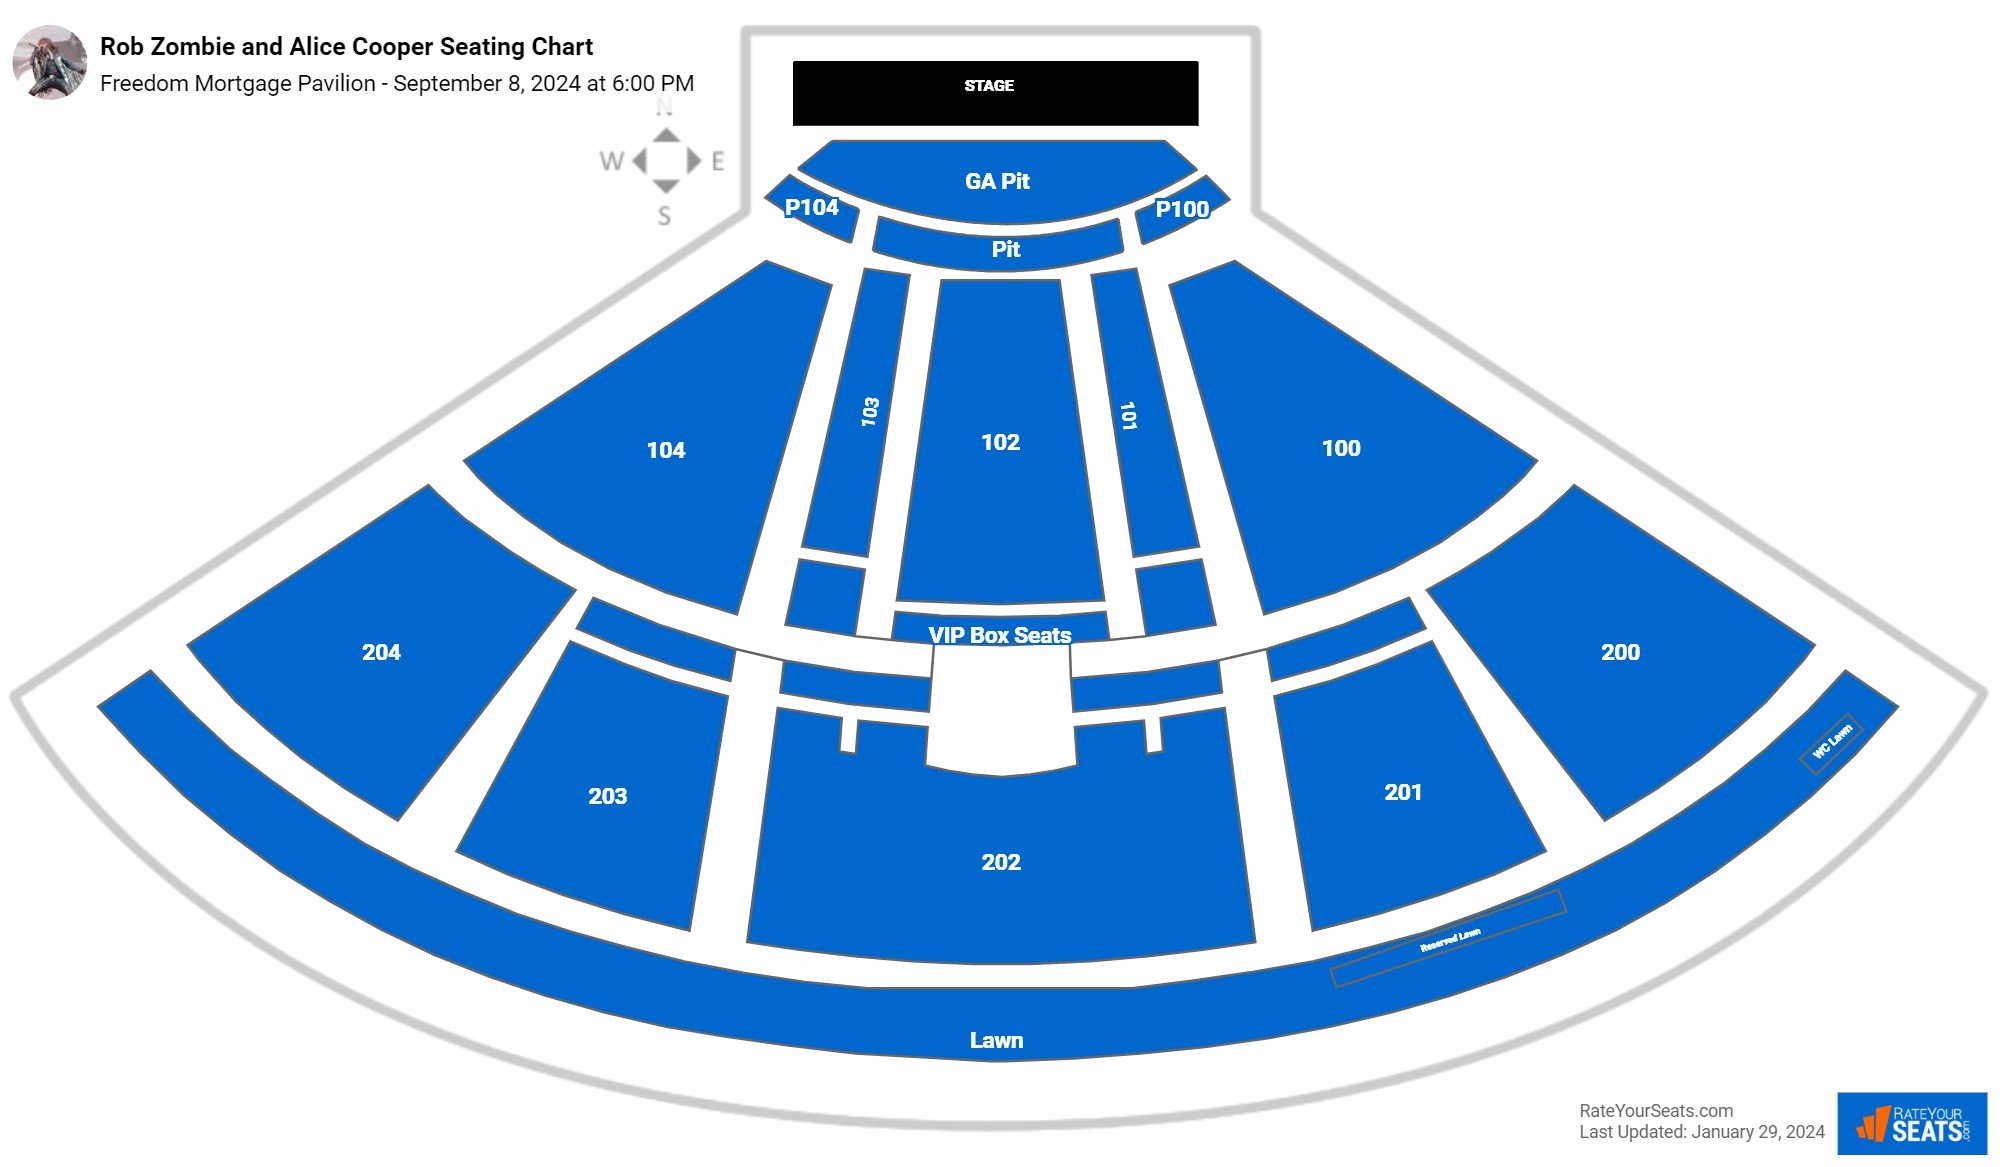 Rob Zombie and Alice Cooper seating chart Freedom Mortgage Pavilion